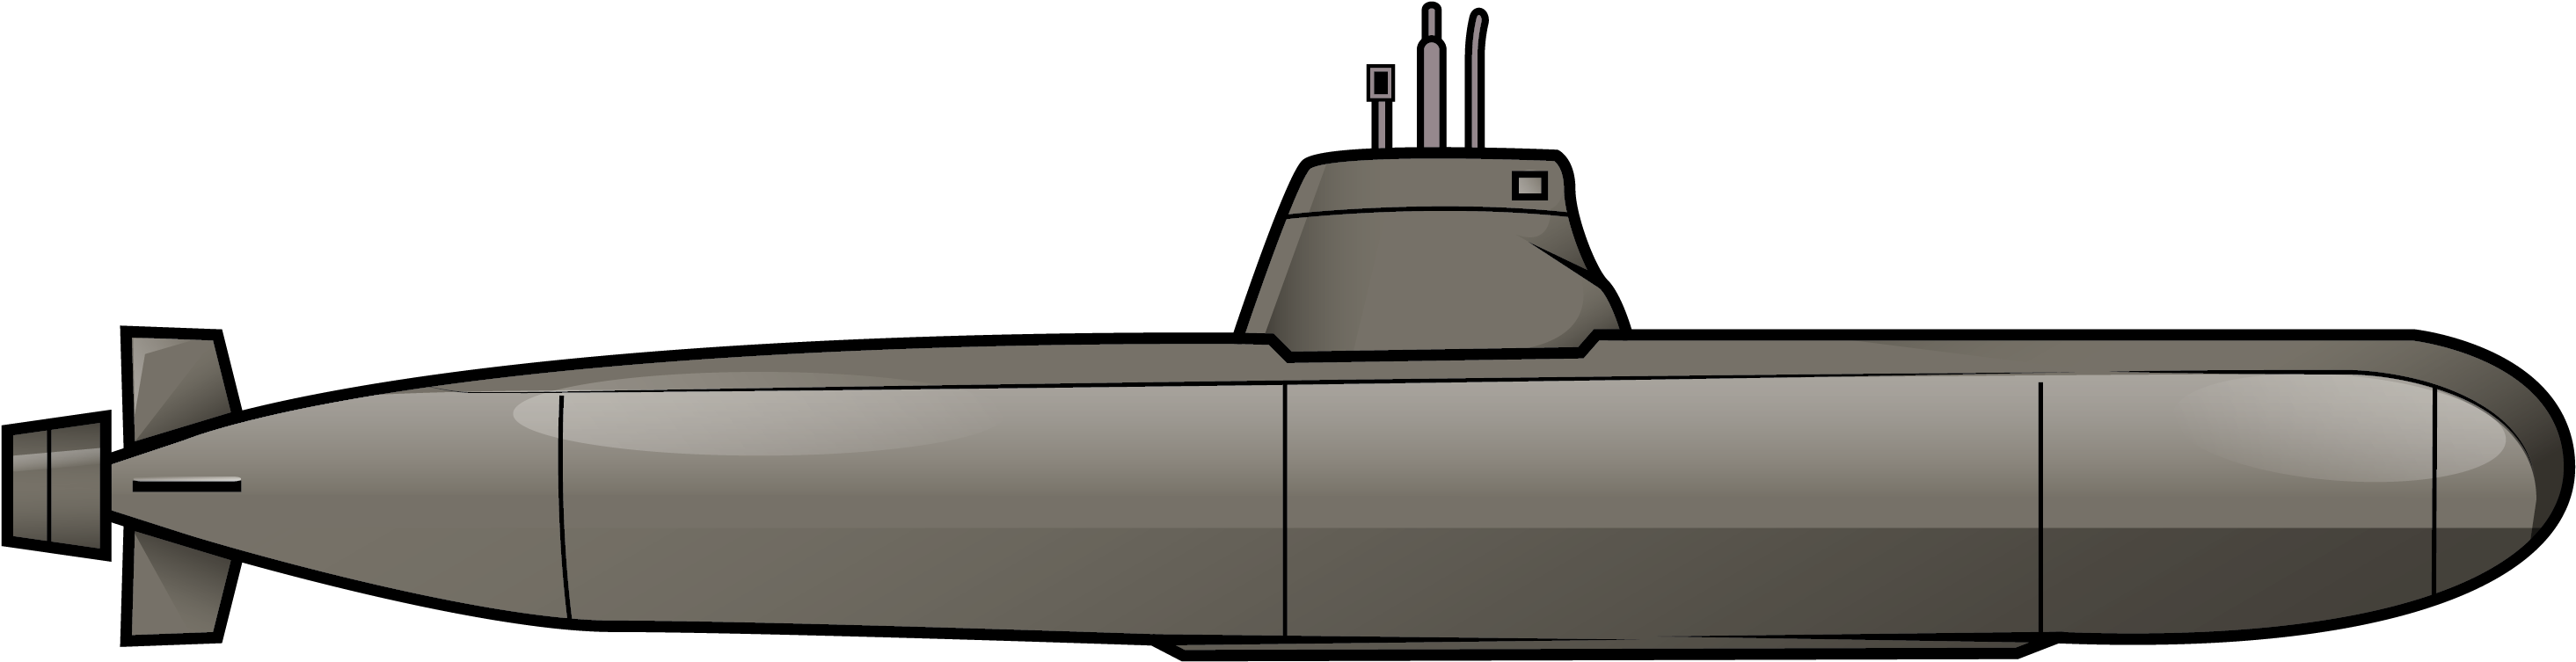 Submarine Clipart to printable to